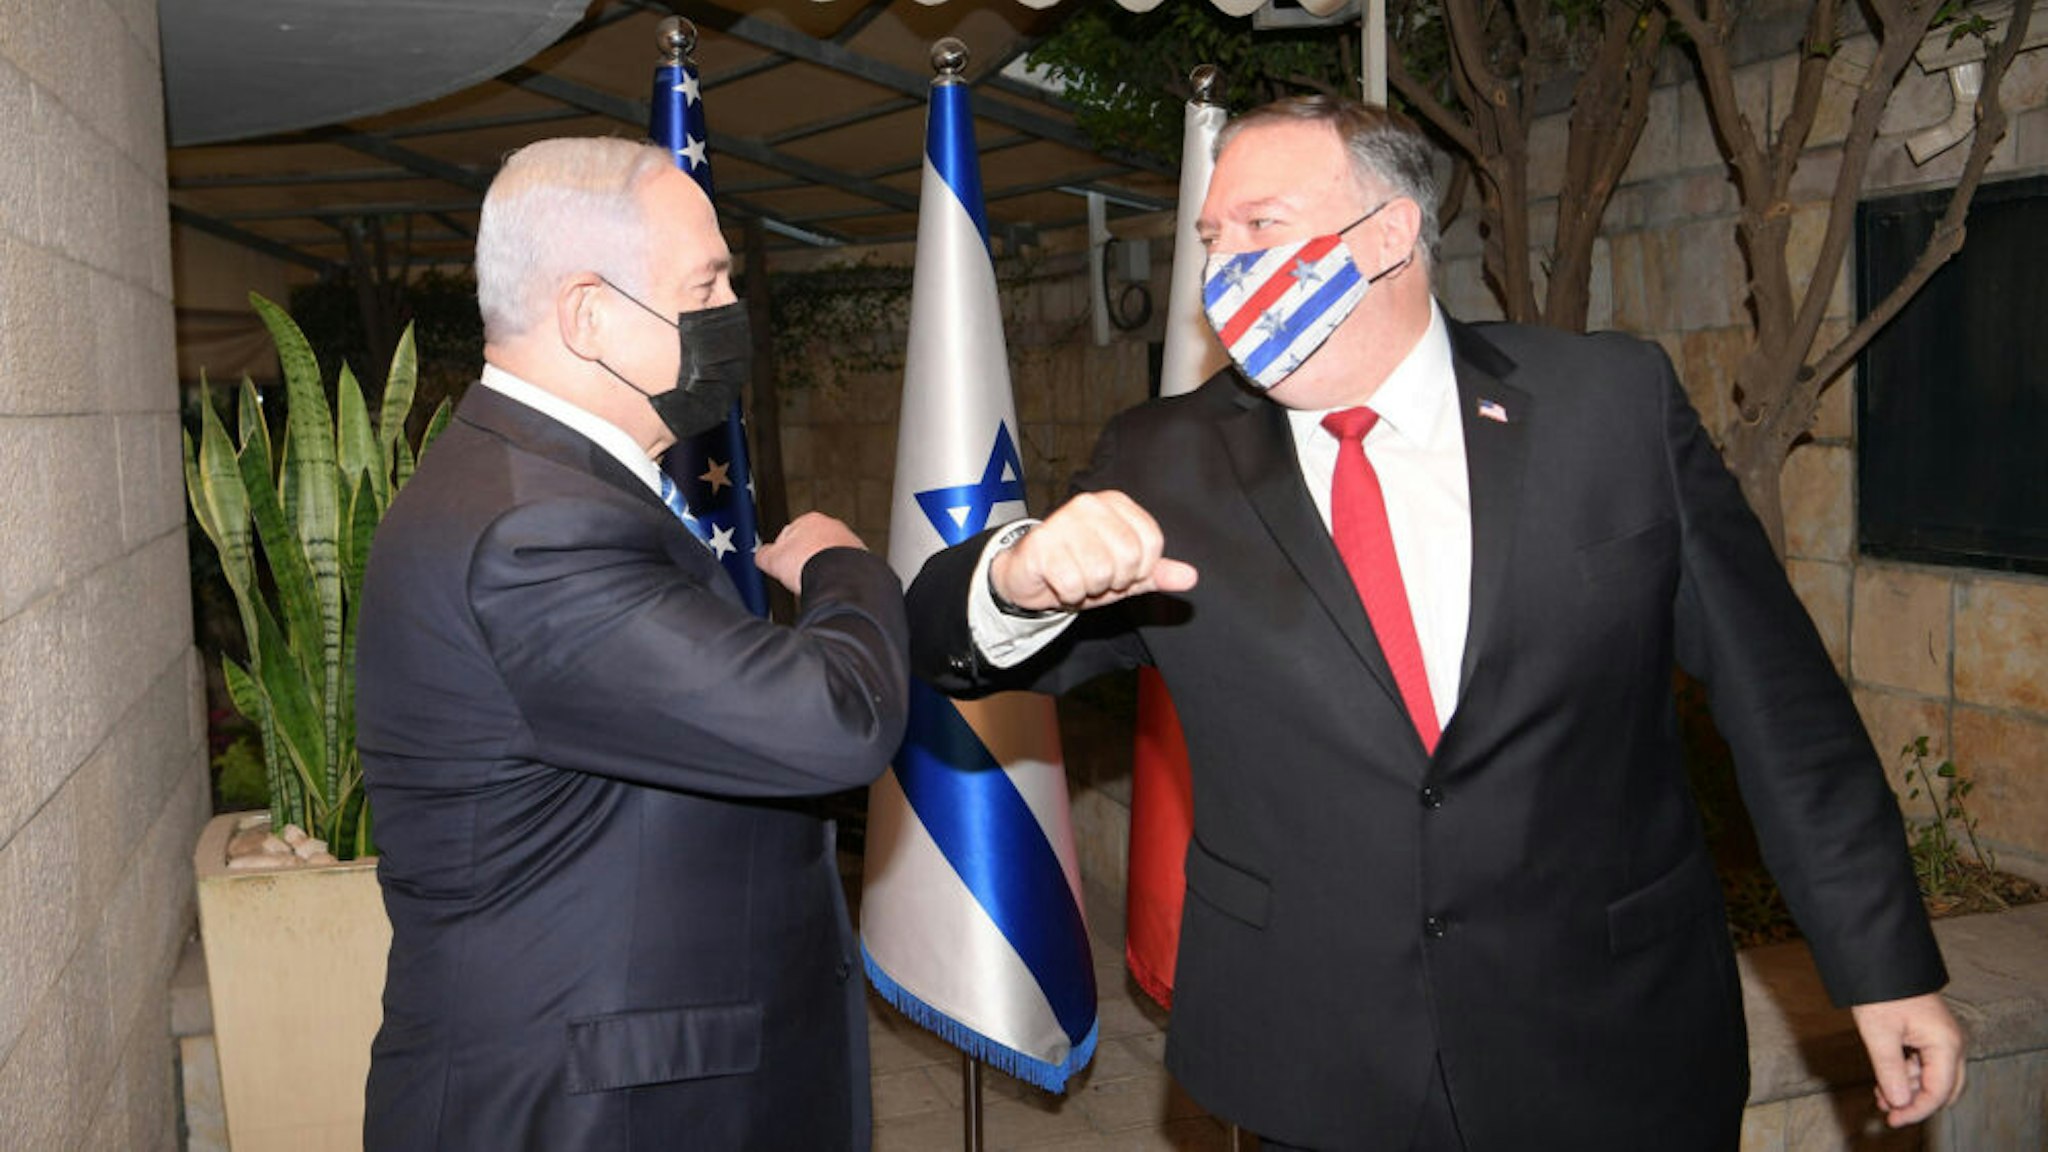 JERUSALEM - NOVEMBER 18: (----EDITORIAL USE ONLY MANDATORY CREDIT - "ISRAELI PRIME MINISTRY / HANDOUT" - NO MARKETING NO ADVERTISING CAMPAIGNS - DISTRIBUTED AS A SERVICE TO CLIENTS----) Israeli Prime Minister Benjamin Netanyahu (L) and US Secretary of State Mike Pompeo (R) greet each other with an elbow bump ahead of their meeting at the Prime Ministry Office in West Jerusalem on November 18, 2020. Bahraini Minister for Foreign Affairs Abdullatif bin Rashid Al Zayani (not seen) also attended the meeting.